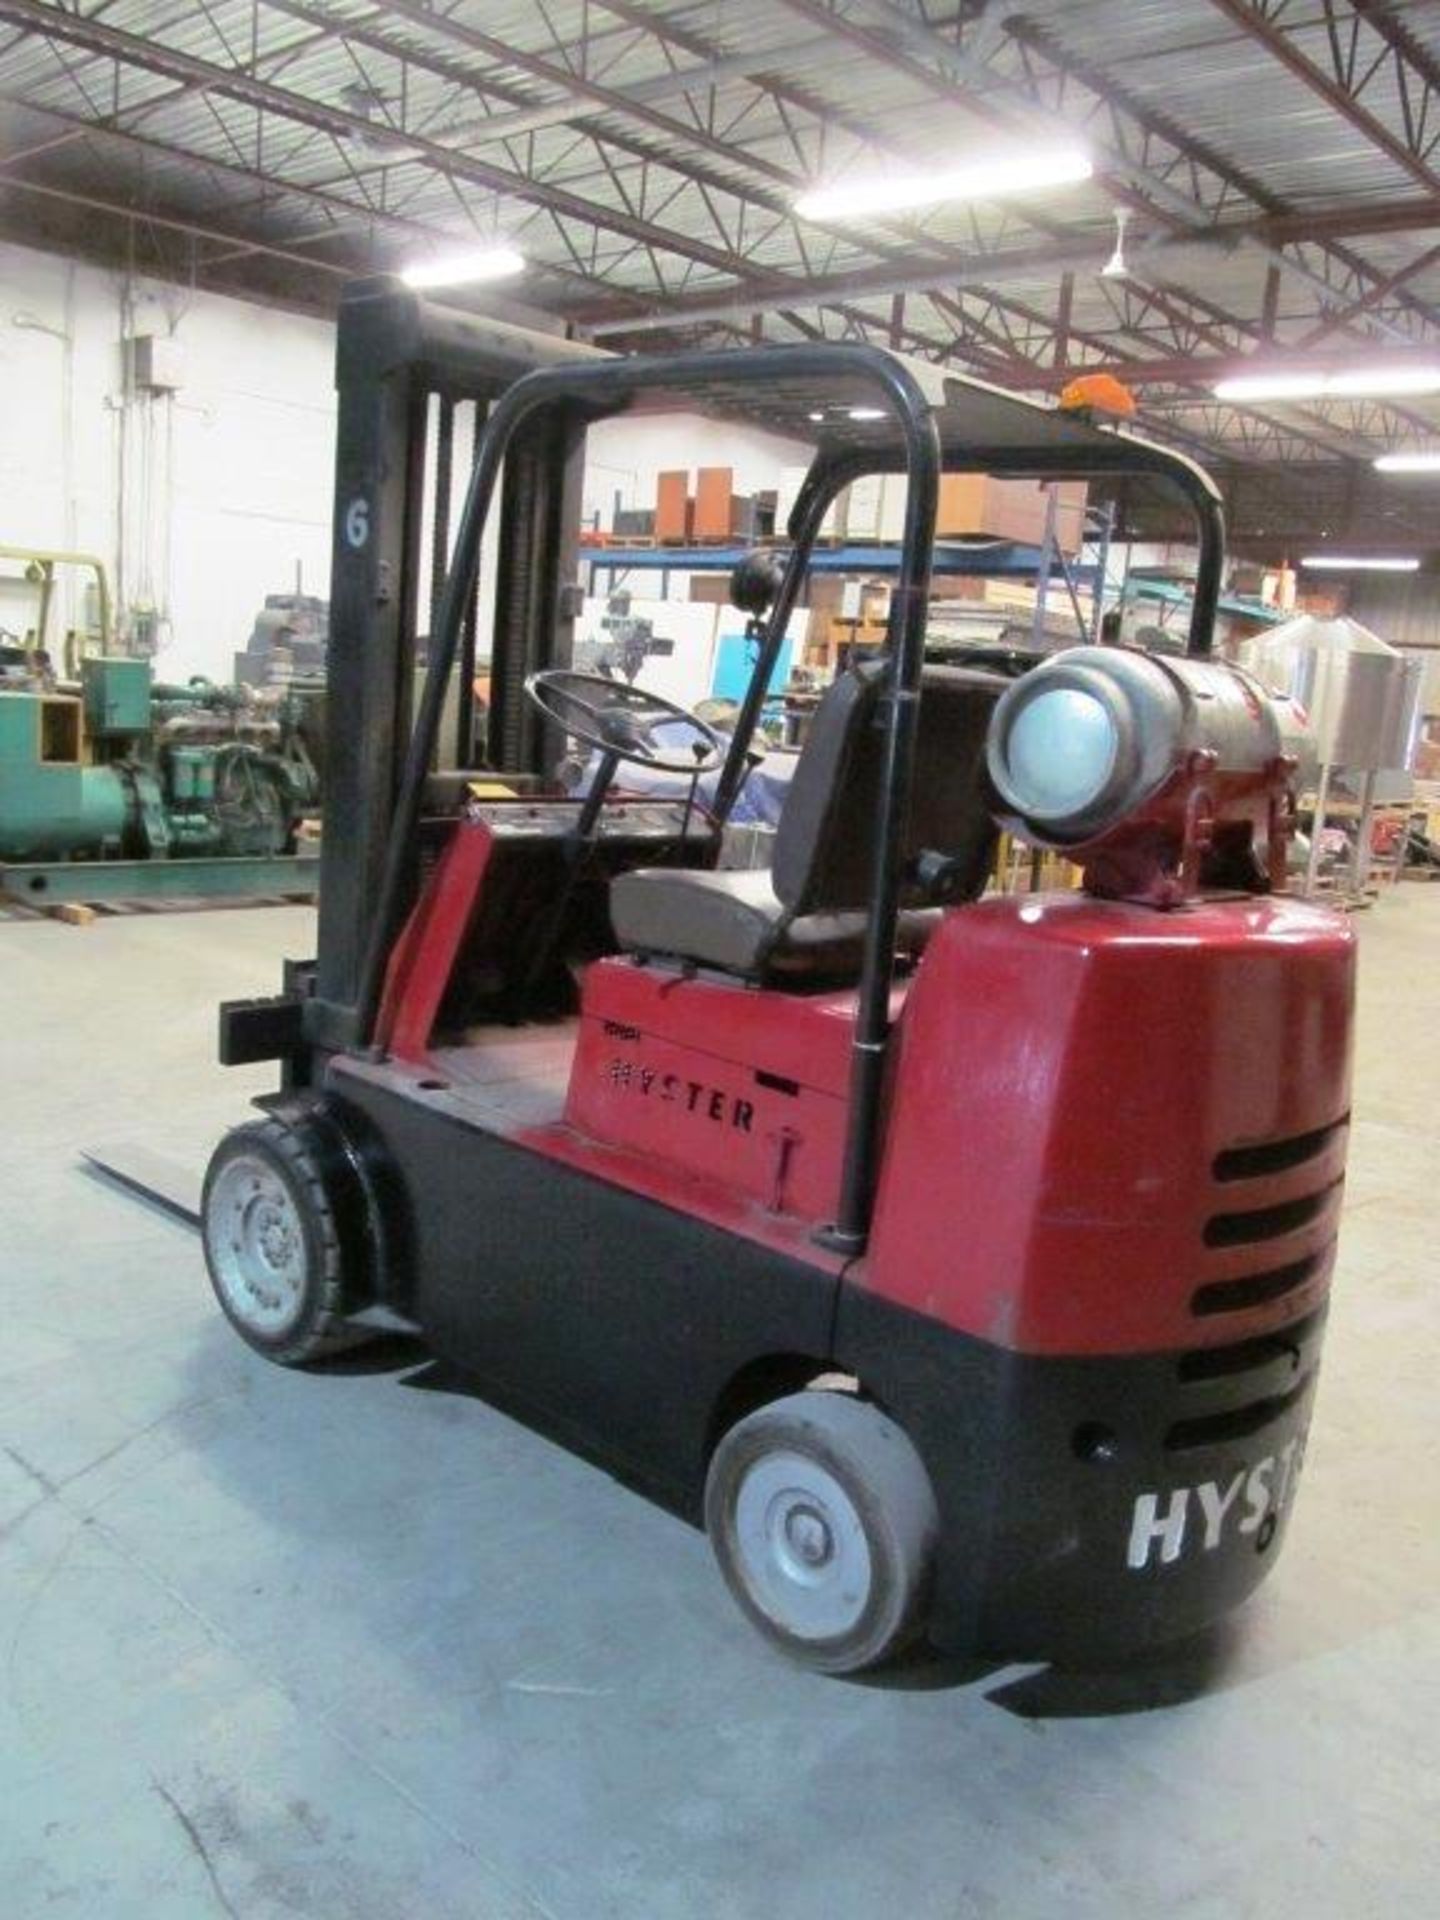 HYSTER PROPANE FORKLIFT HARD TIRES MODEL: S100B, LIFTING CAPACITY 10,000LBS, S/N A017D02351V, - Image 6 of 12